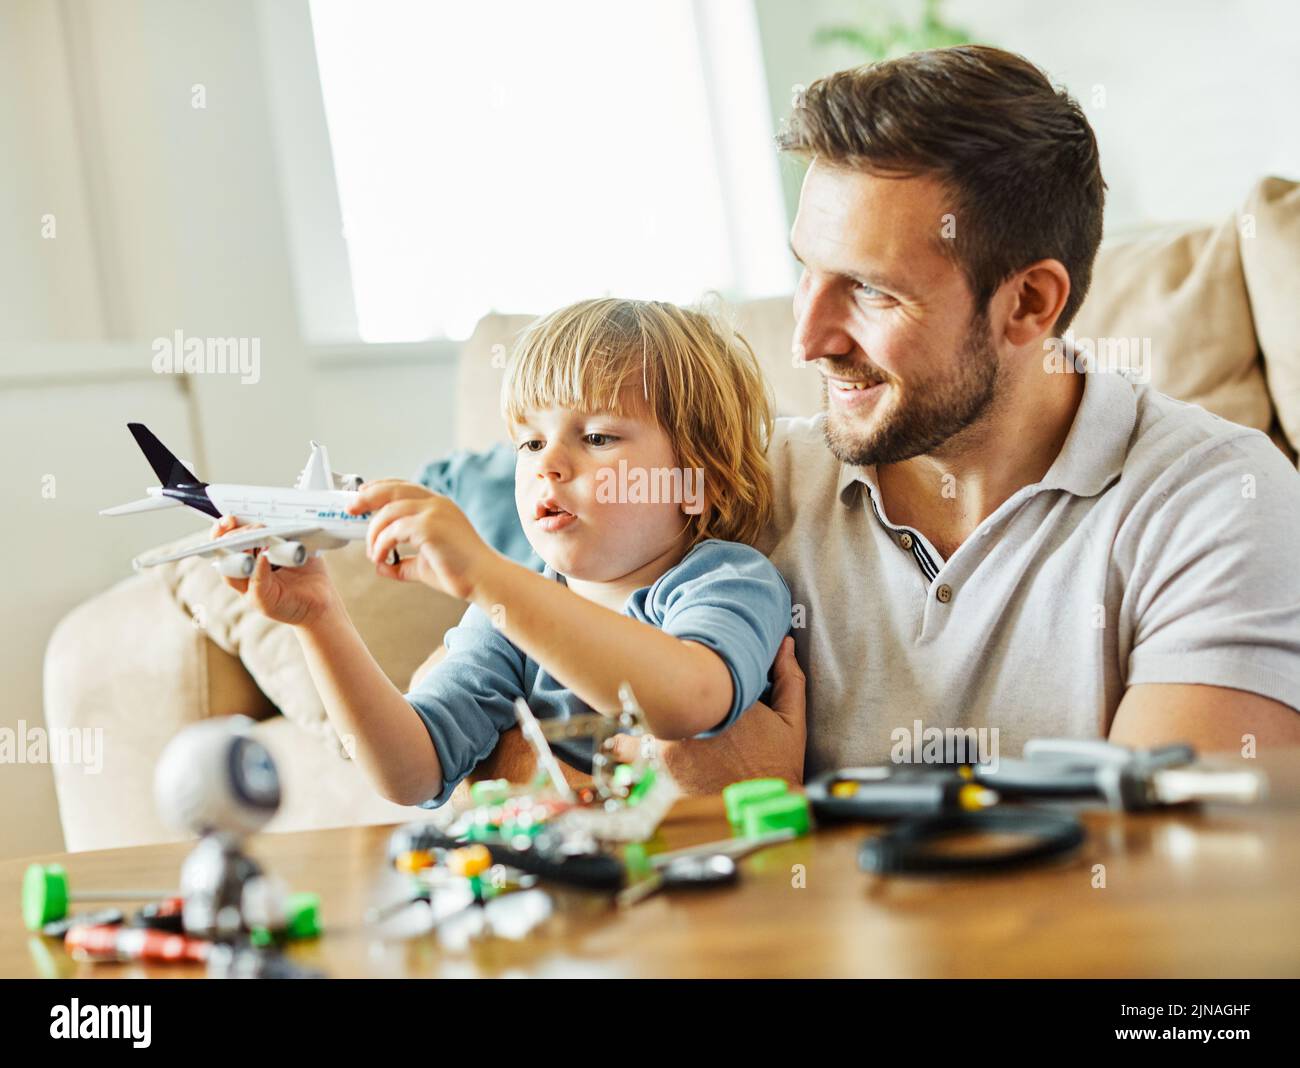 child son father family happy playing kid childhood dad love fun smiling little man home toy airplane travel vacation plane holiday Stock Photo